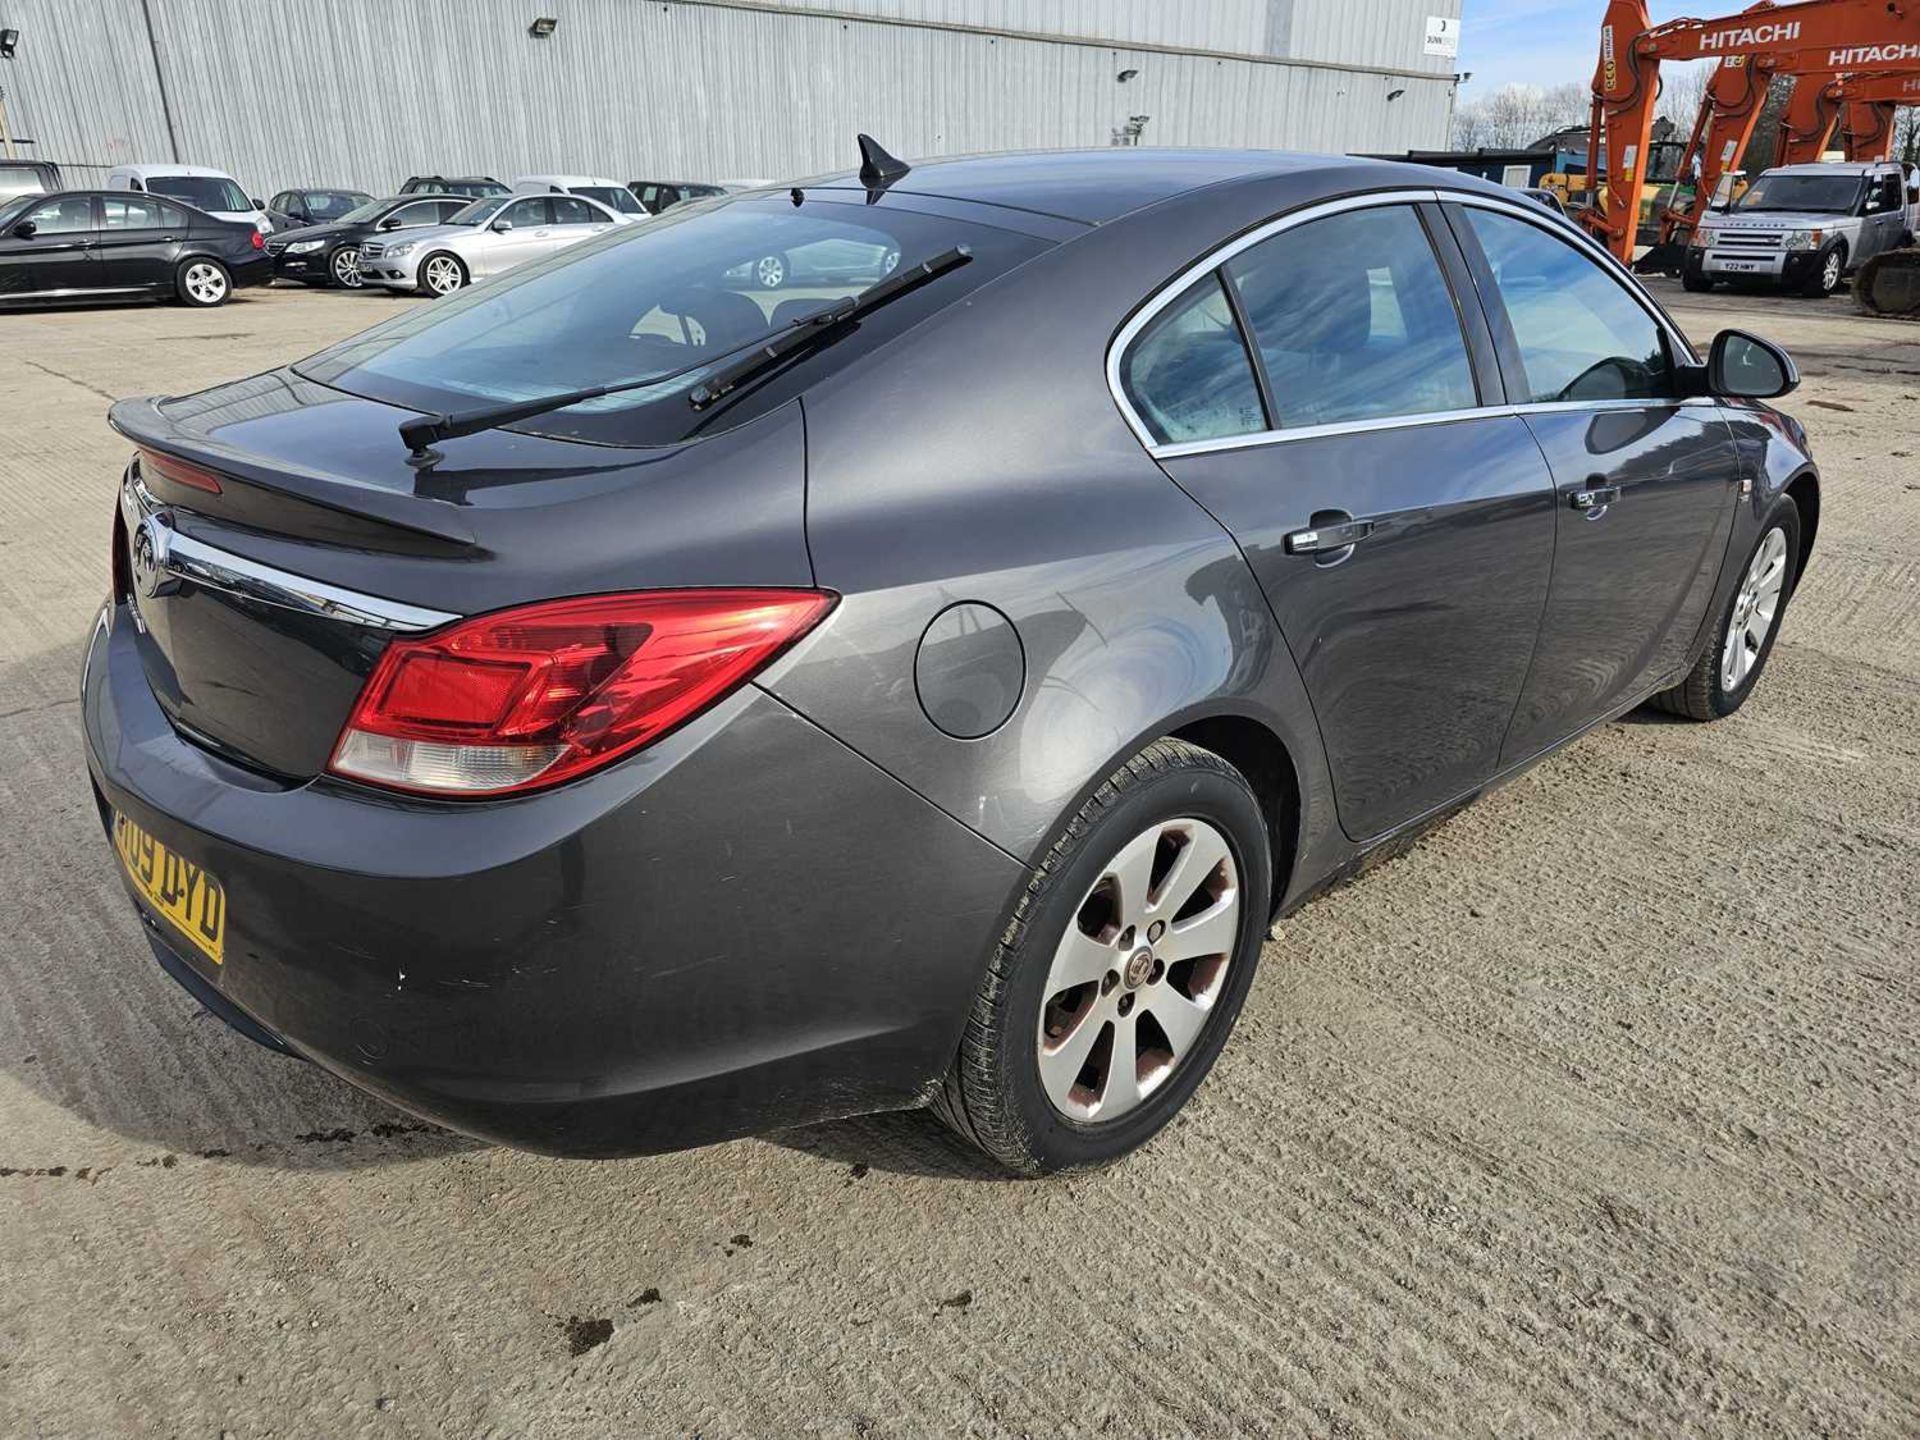 2009 Vauxhall Insignia, 6 Speed, Bluetooth, Cruise Control, Climate Control (Reg. Docs. Available, T - Image 5 of 28